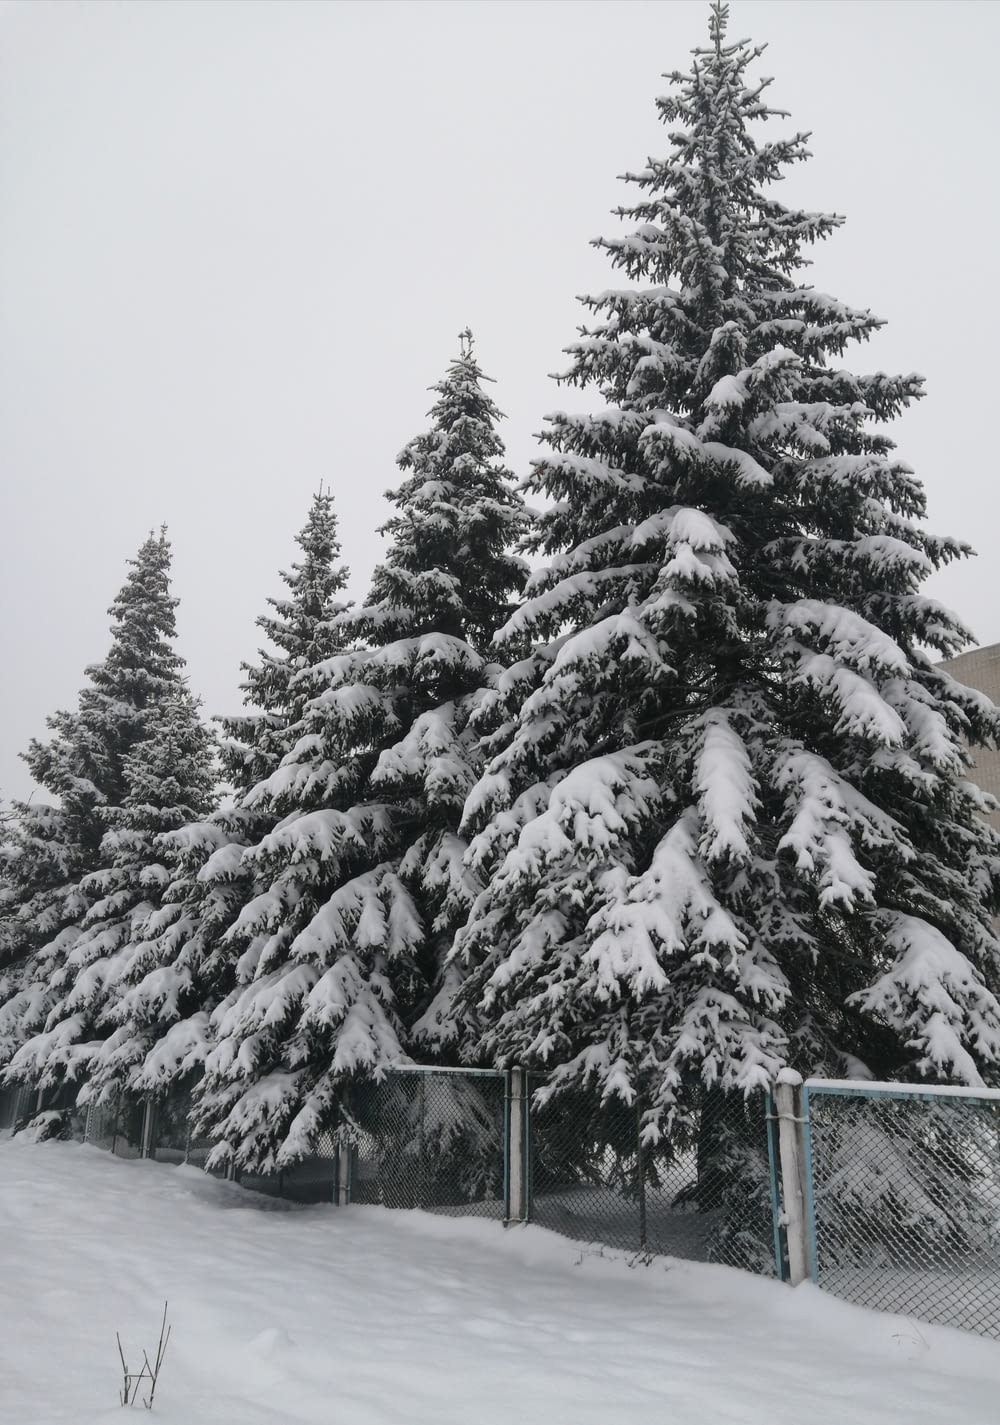 a snowy landscape with trees